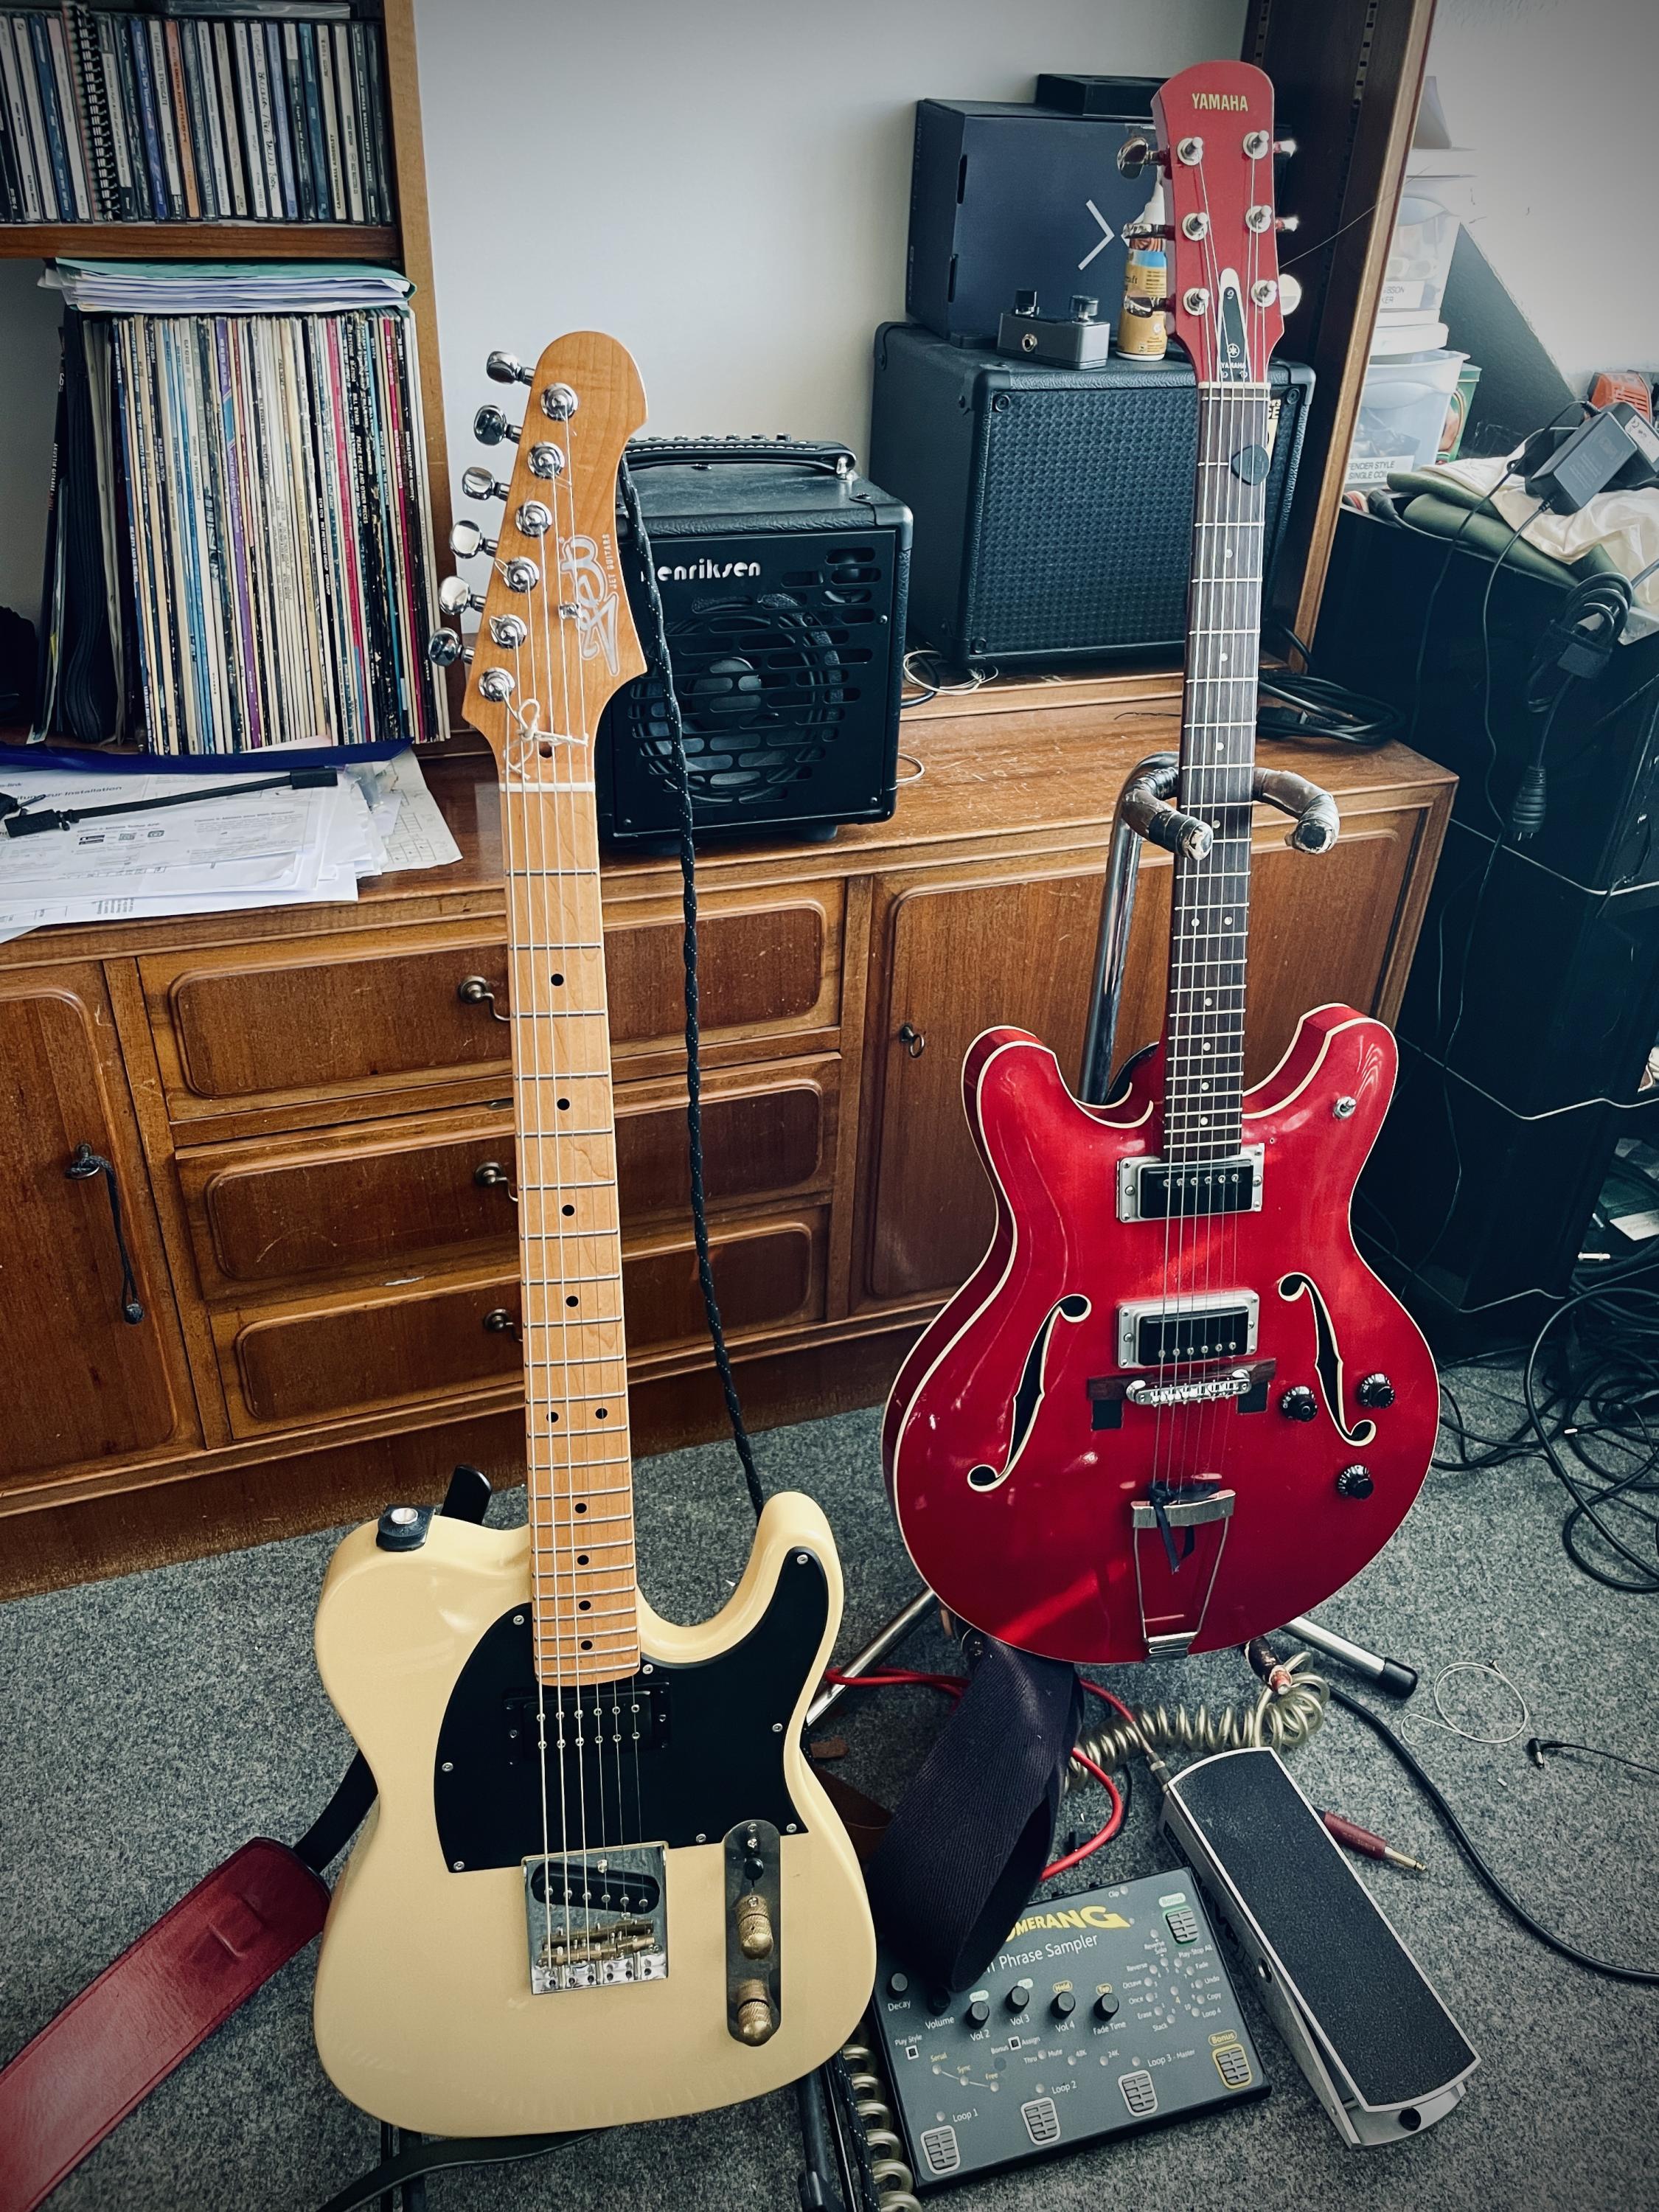 Telecaster Love Thread, No Archtops Allowed-img_8943-jpg